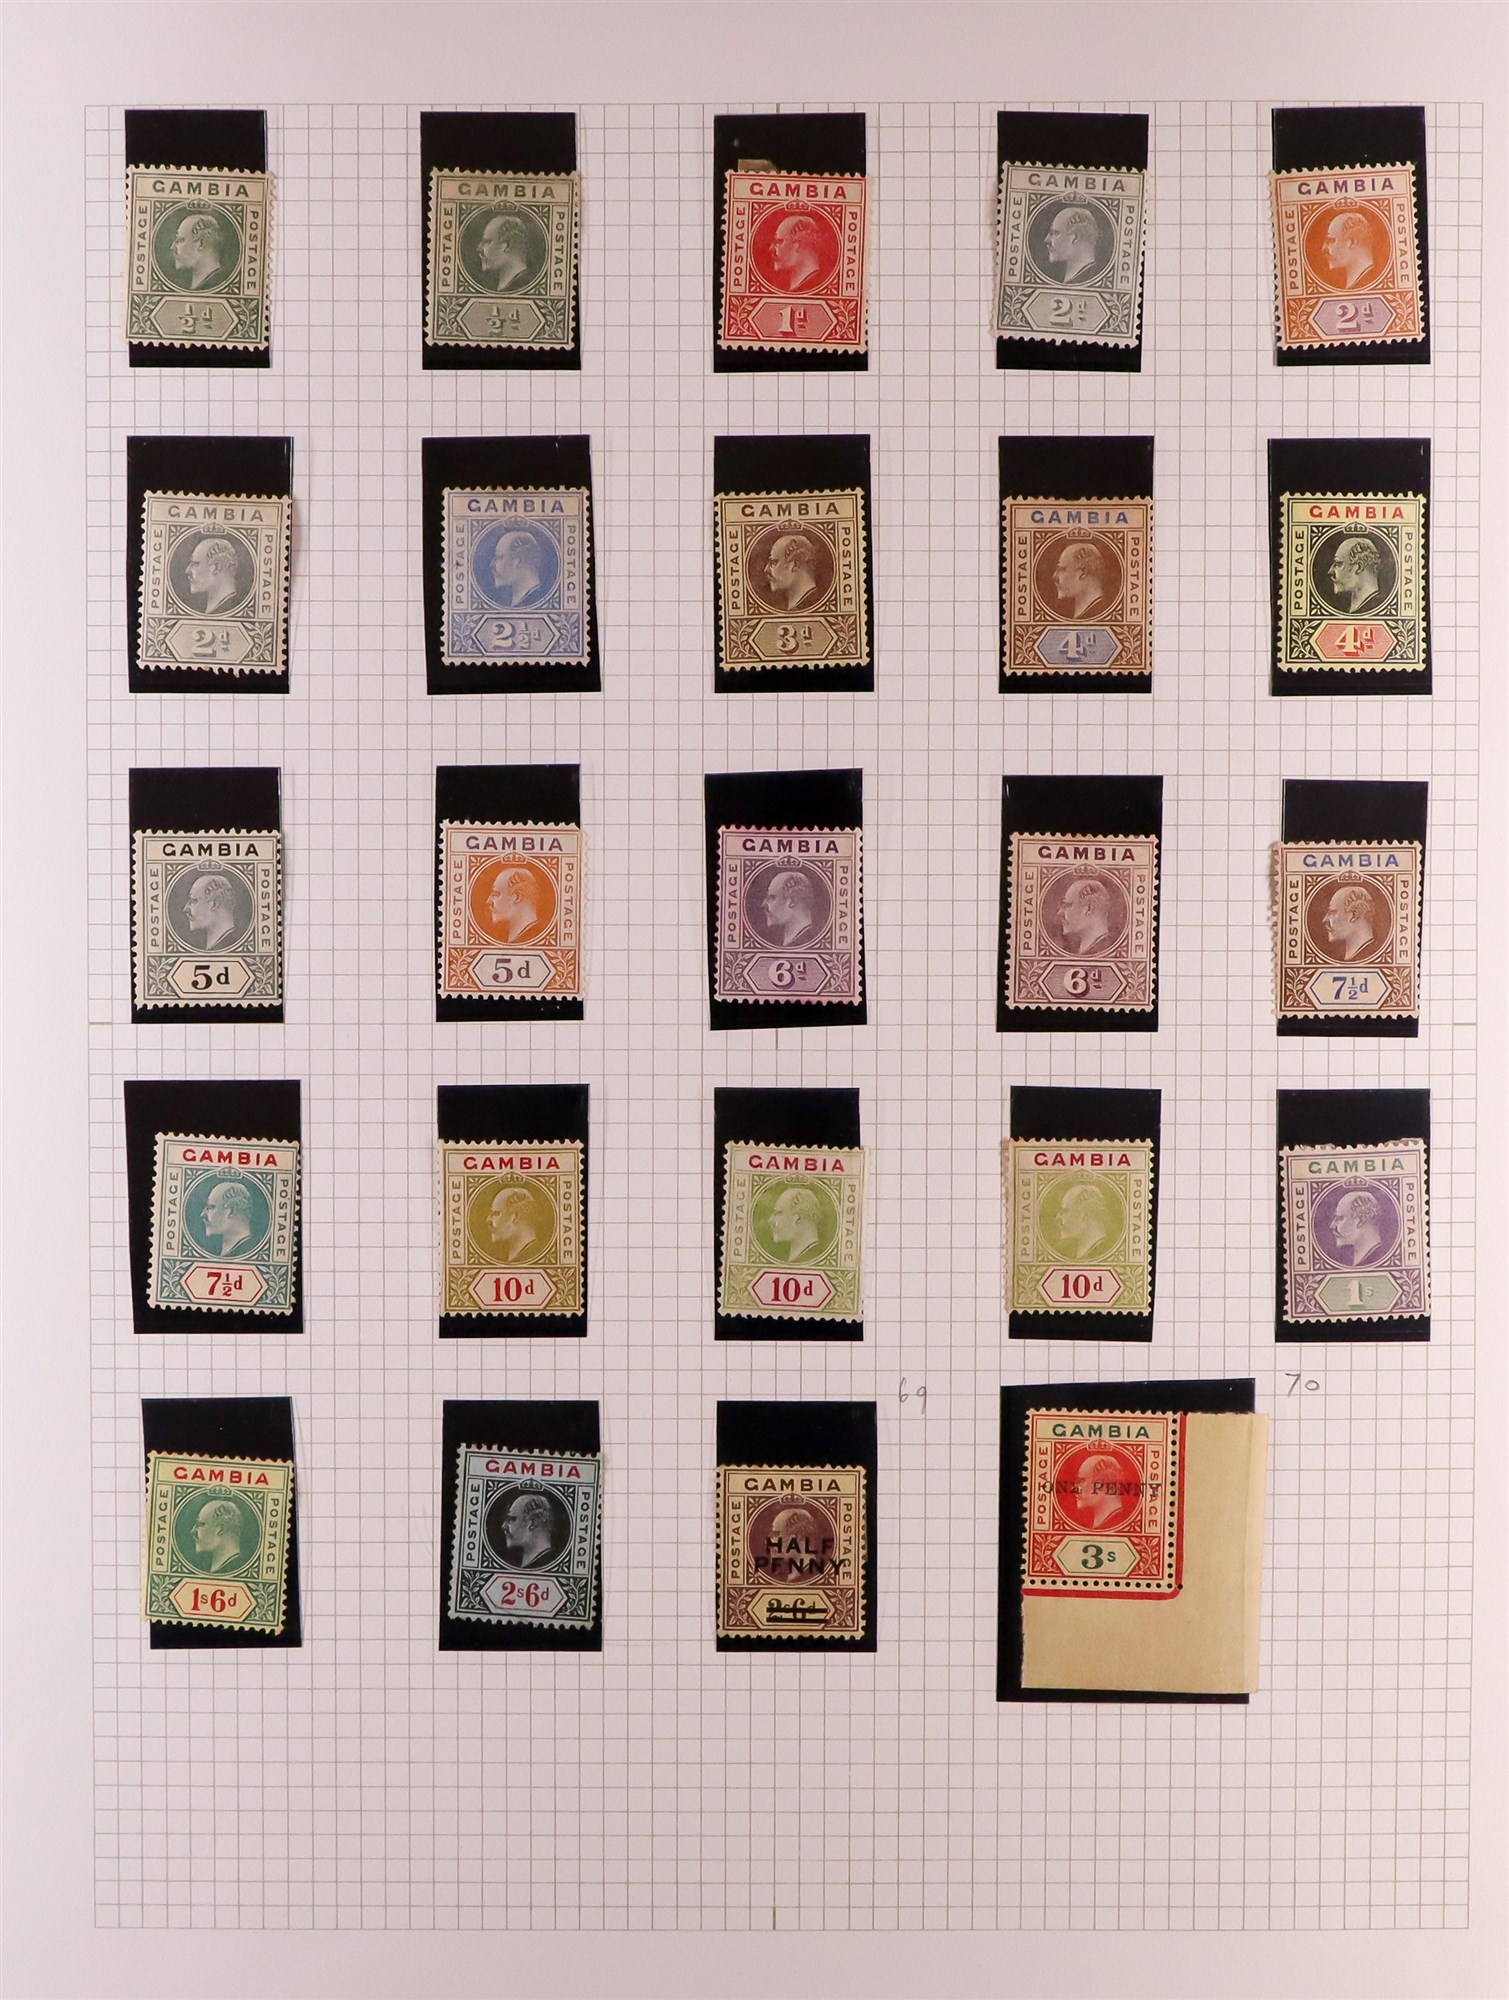 GAMBIA 1880 - 1935 COLLECTION incl. various Cameo issues mint, 1s violet used strip 3, 1902-05 set - Image 7 of 15